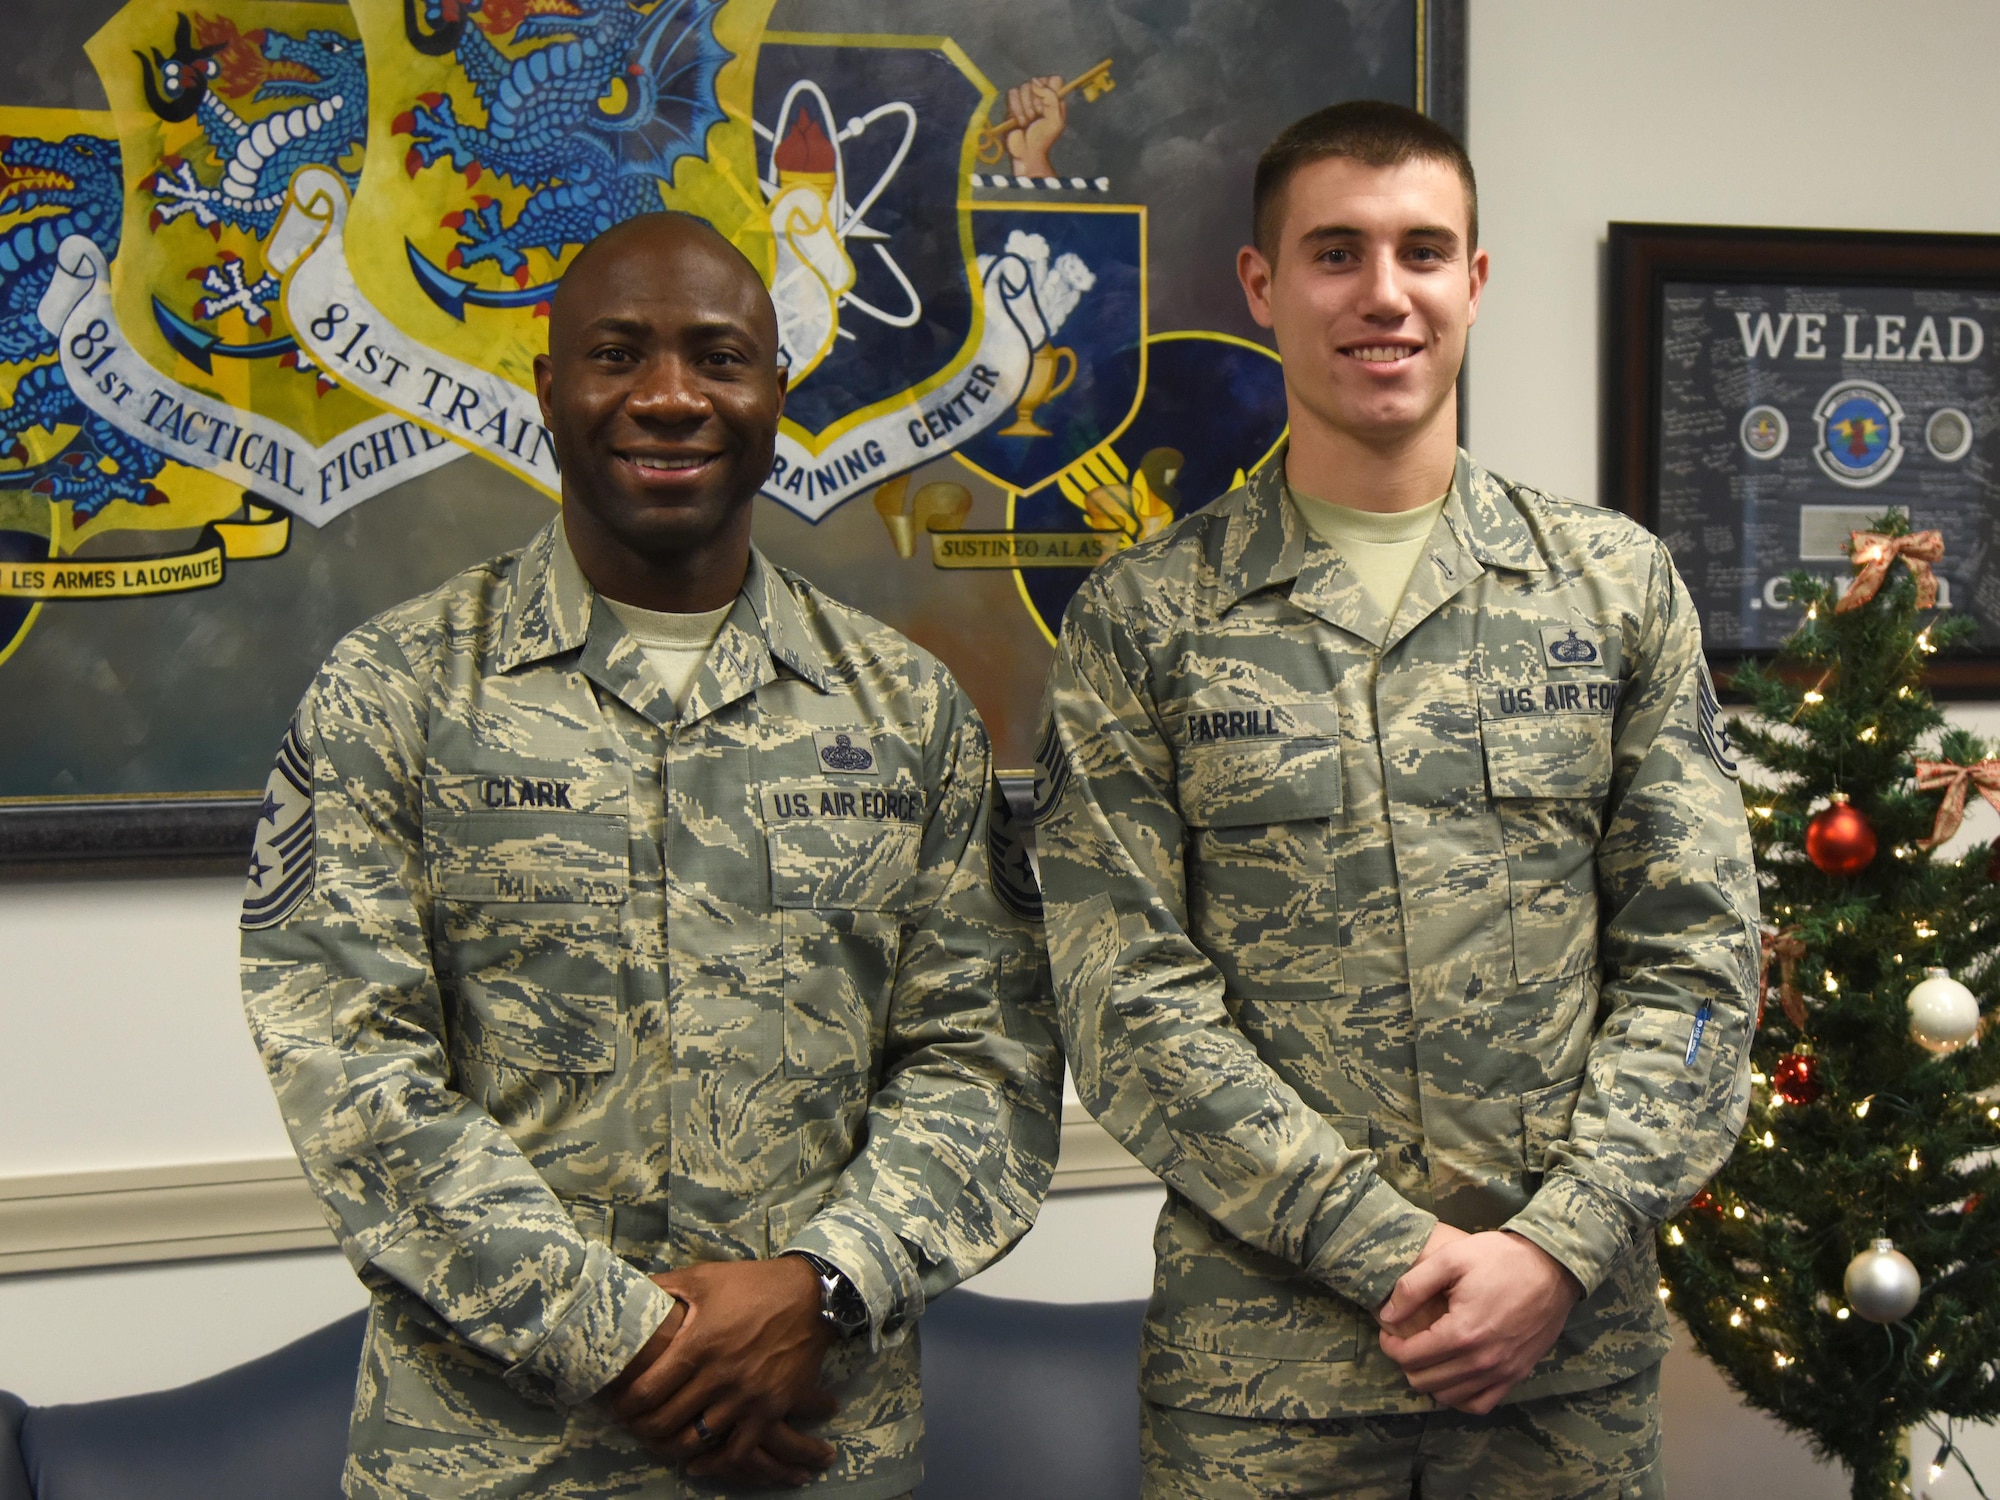 Chief Master Sgt. Vegas Clark, 81st Training Wing command chief, and Staff Sgt. Aaron Farrill, 81st Contracting Squadron unit training manager, pose for a photo at the 81st TRW headquarters building Dec. 7, 2016, at Keesler Air Force Base, Miss. Farrill participated in the new Command Chief for a Day program which highlights outstanding enlisted performers from around the wing. Each Airman selected for the program will spend the day shadowing Clark to learn what it takes to be a command chief. (U.S. Air Force photo by Kemberly Groue)